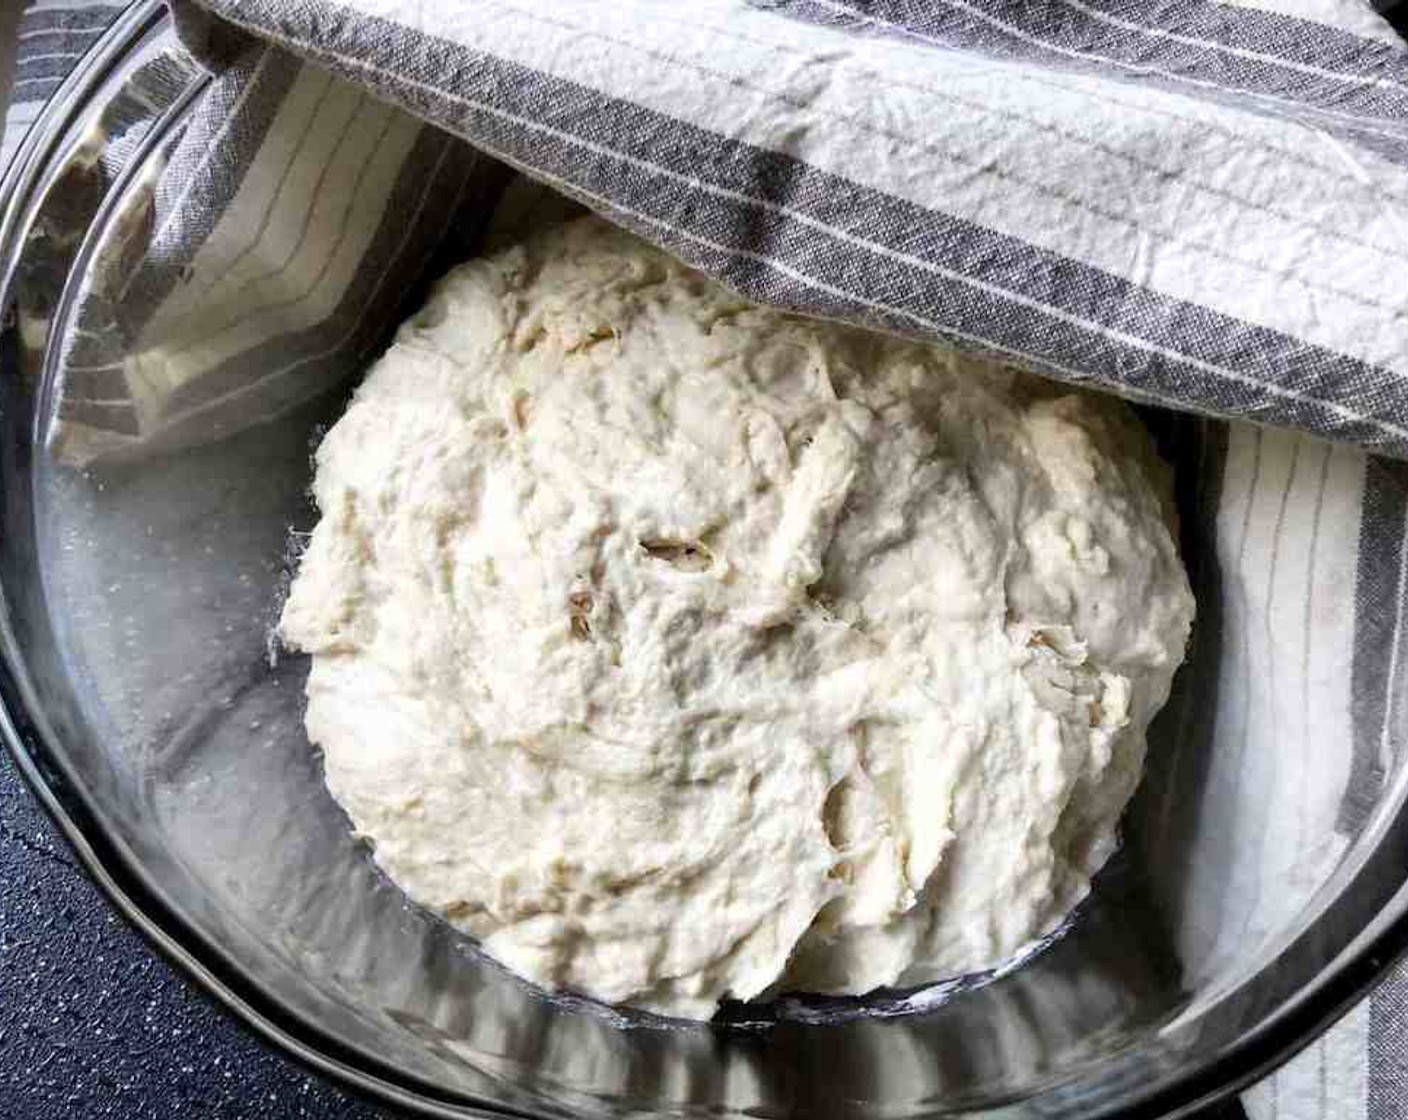 step 3 Cover with a non-airtight lid. Allow the dough to rise at room temperature until it begins to flatten on top, about 2 hours. Do not punch down the dough! With this method, you're trying to retain as much gas in the dough as possible.